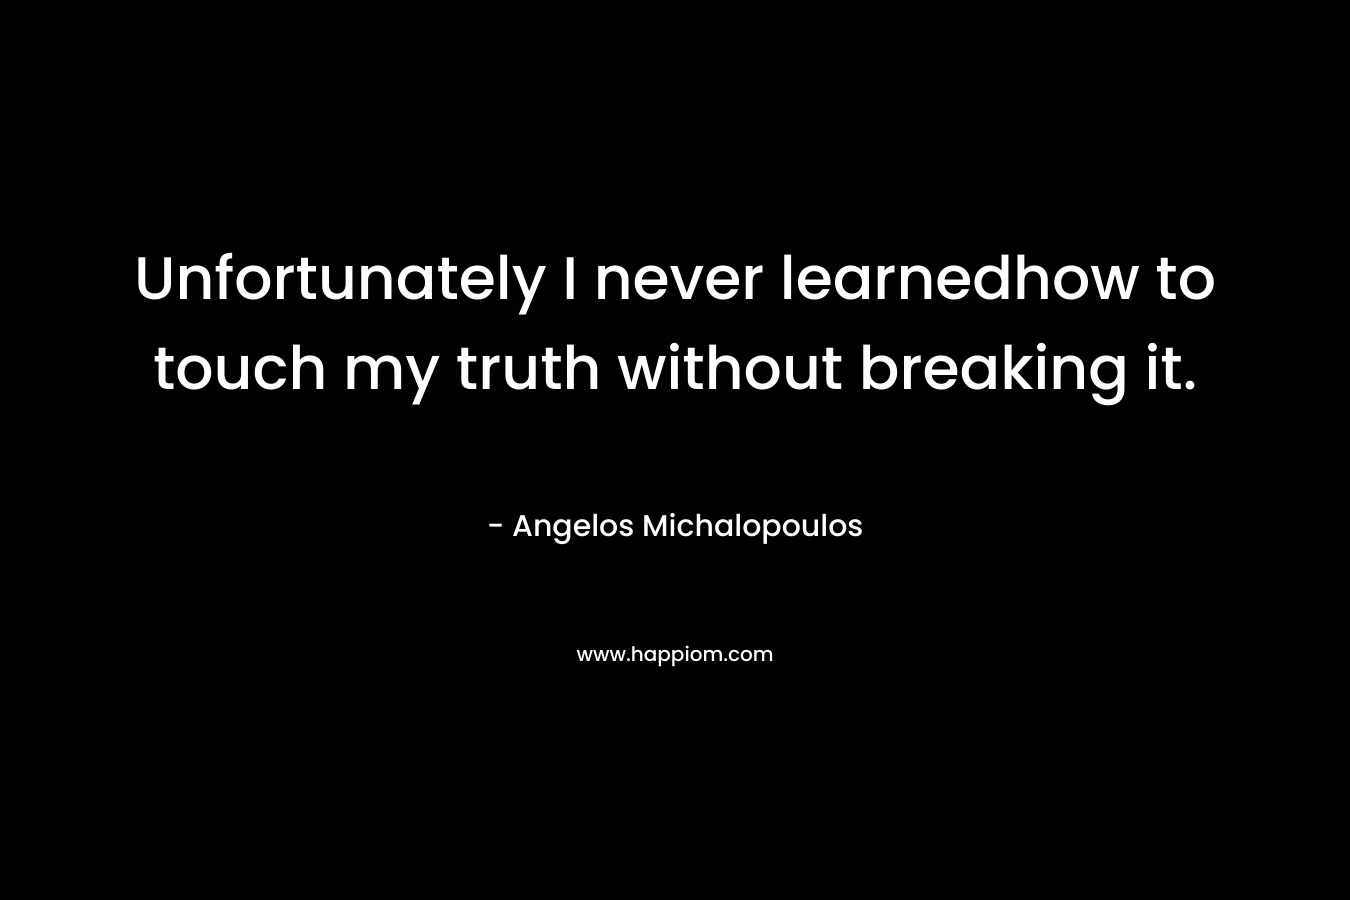 Unfortunately I never learnedhow to touch my truth without breaking it.